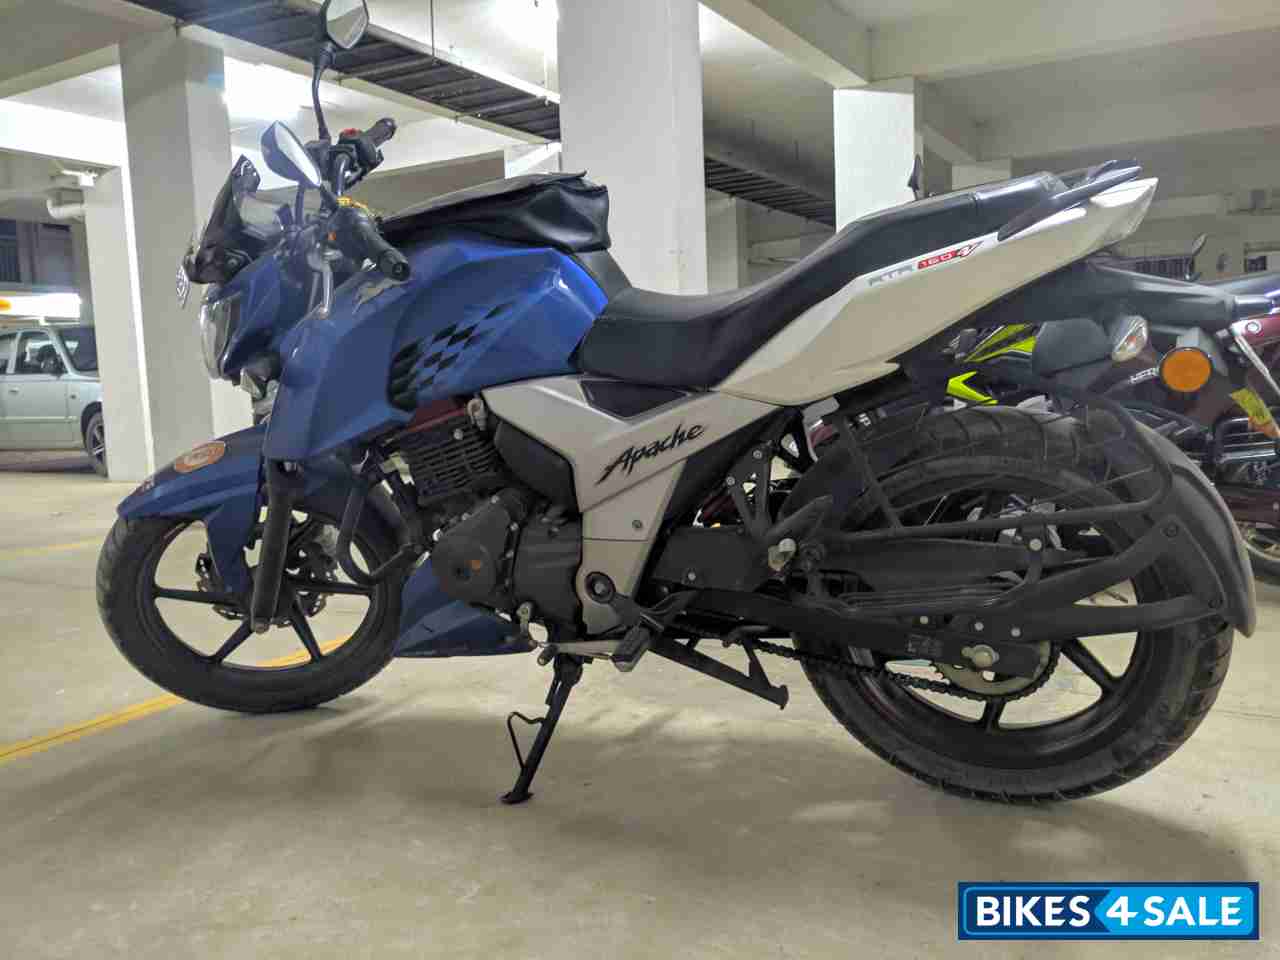 Used 2018 Model Tvs Apache Rtr 160 4v For Sale In Bangalore Id